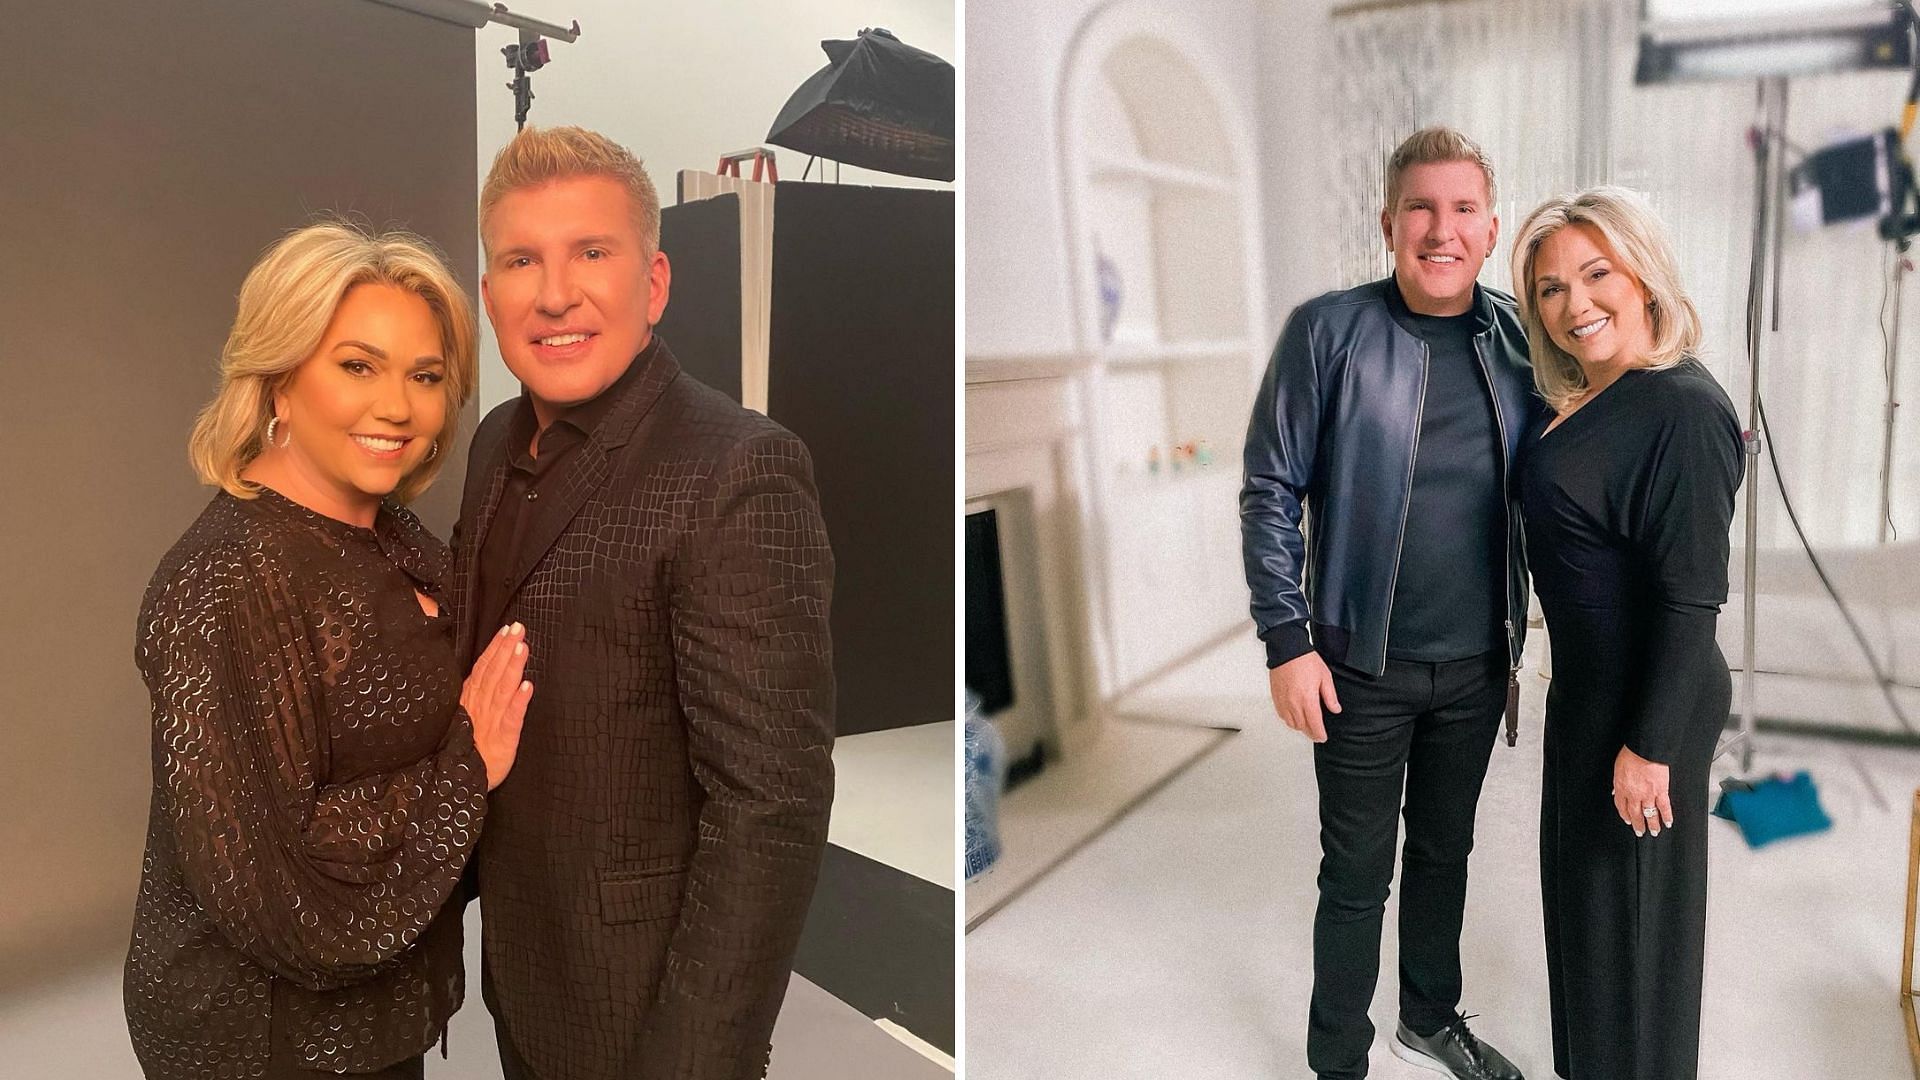 Reality stars Todd and Julie Chrisley were found guilty on multiple charges (Image via juliechrisley/Instagram)